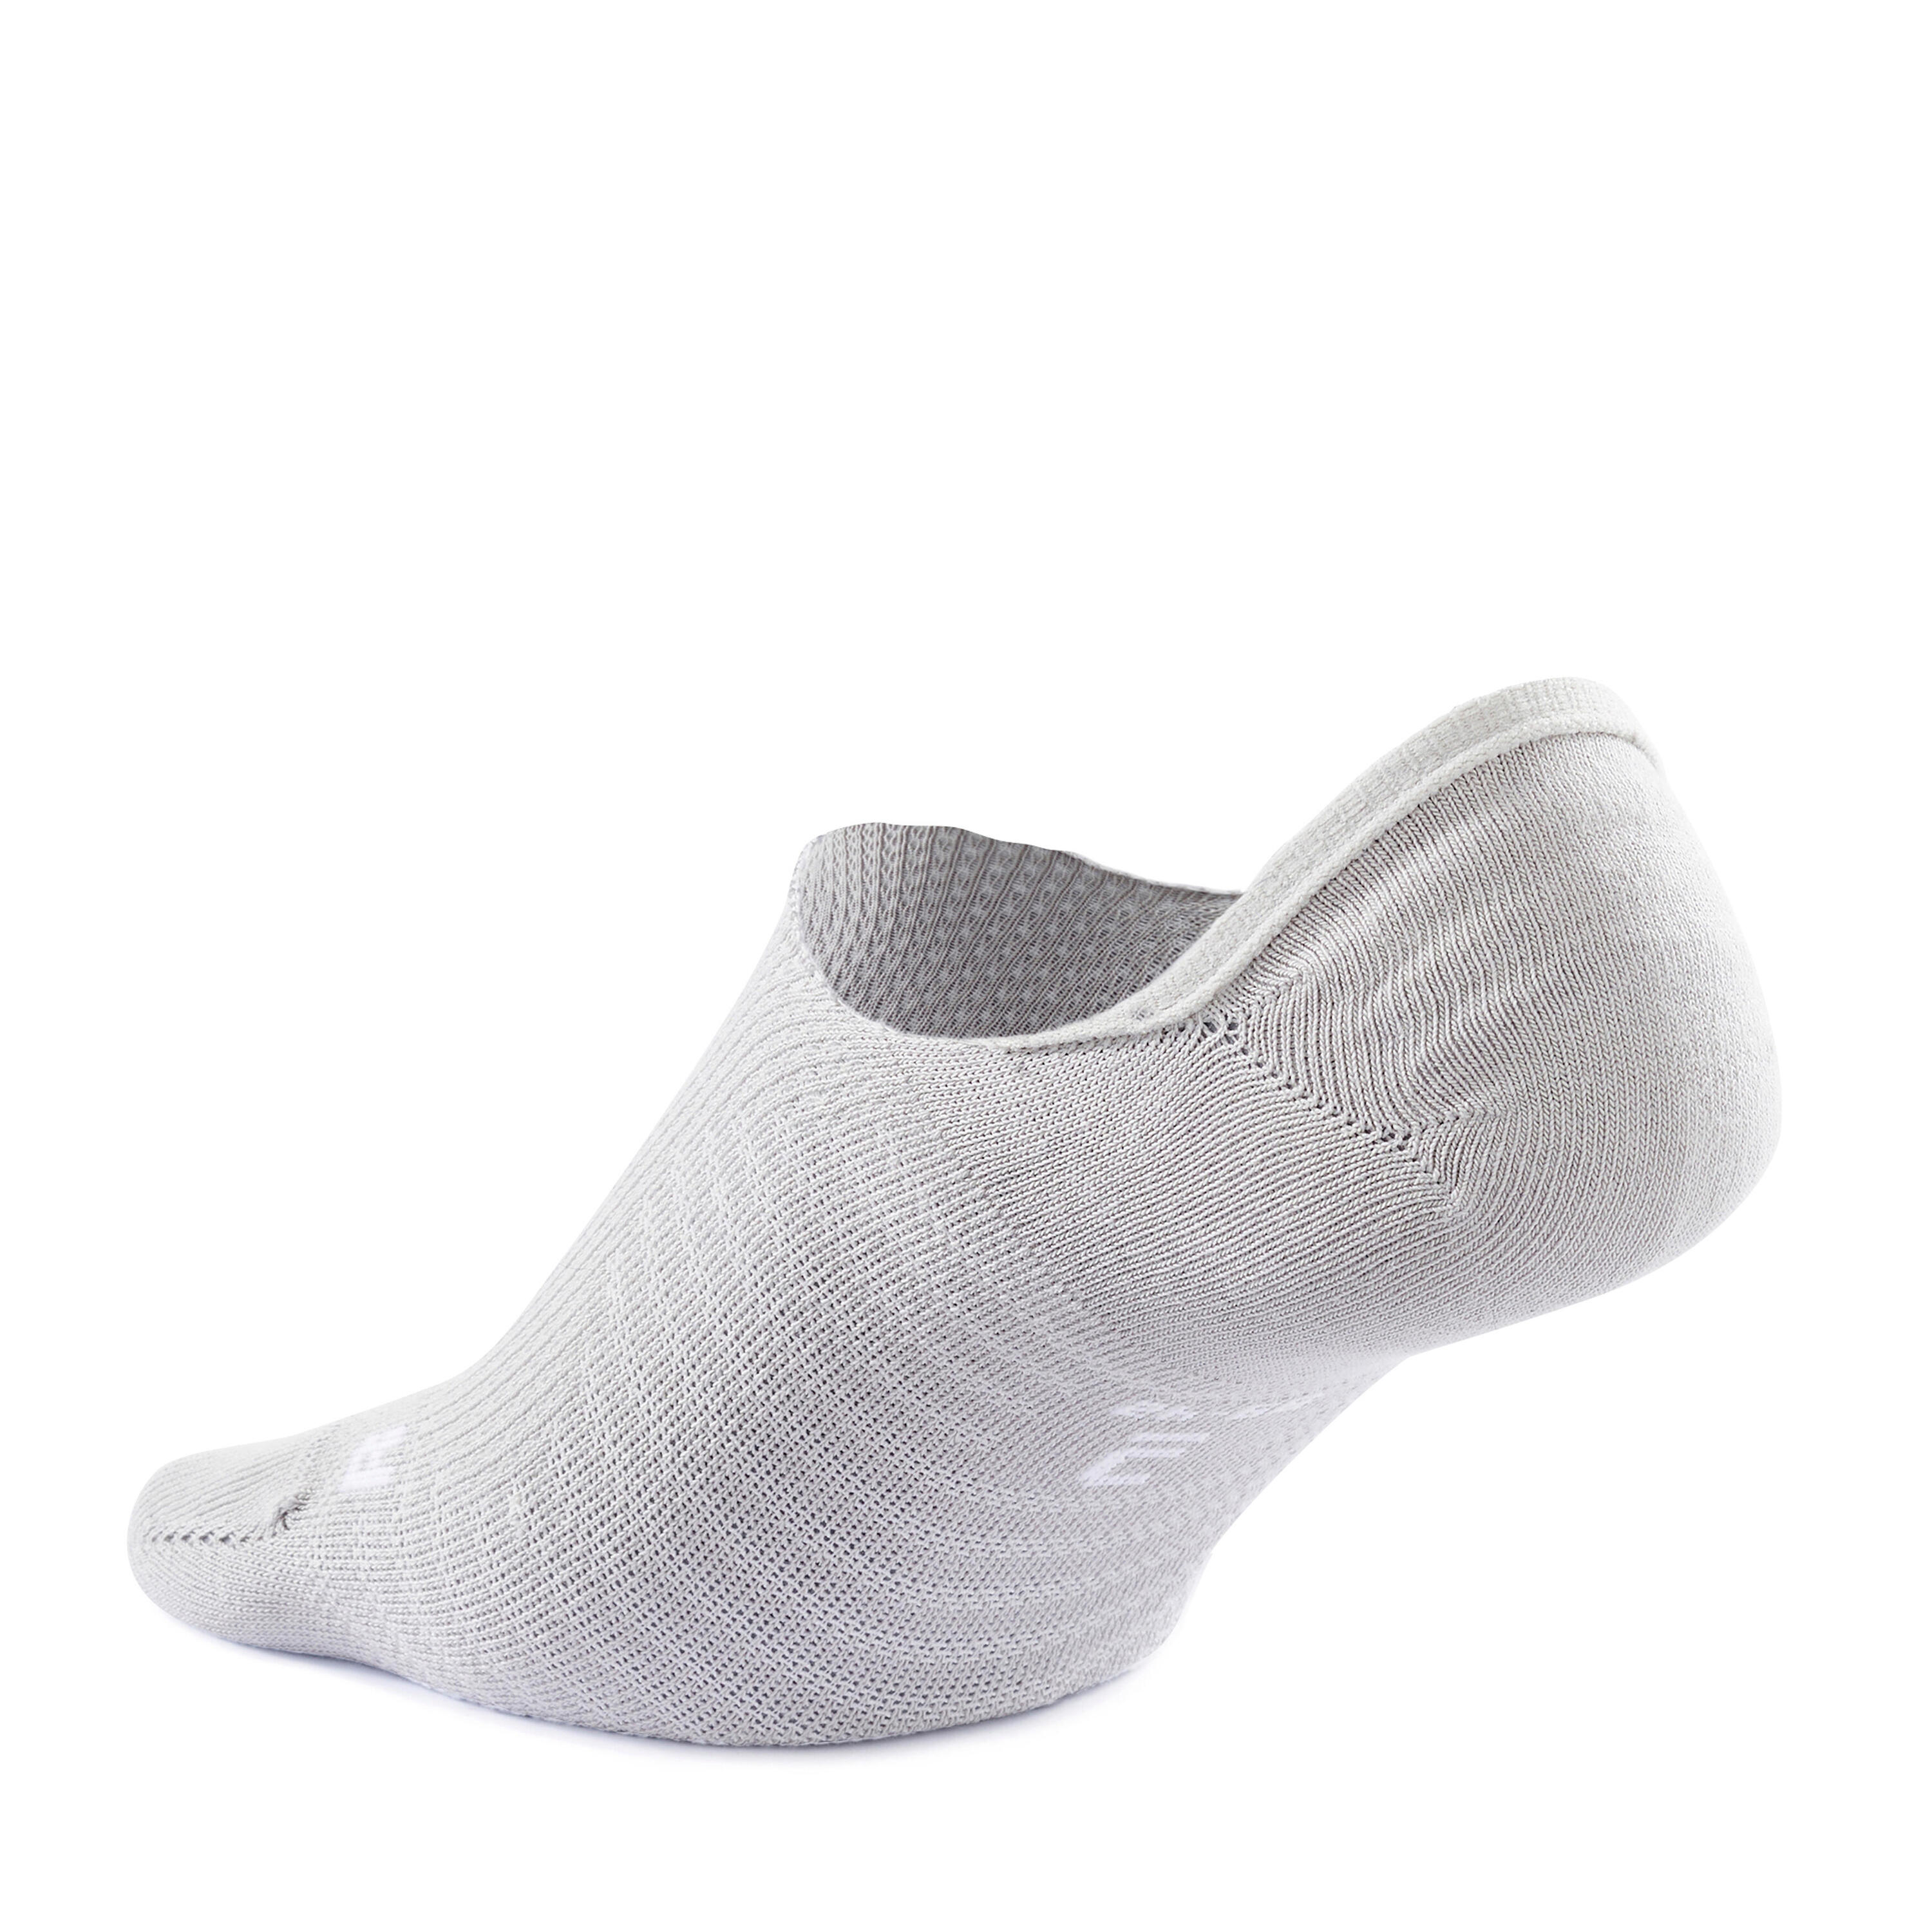 Invisible walking socks - pack of 2 pairs - white/grey 5/9